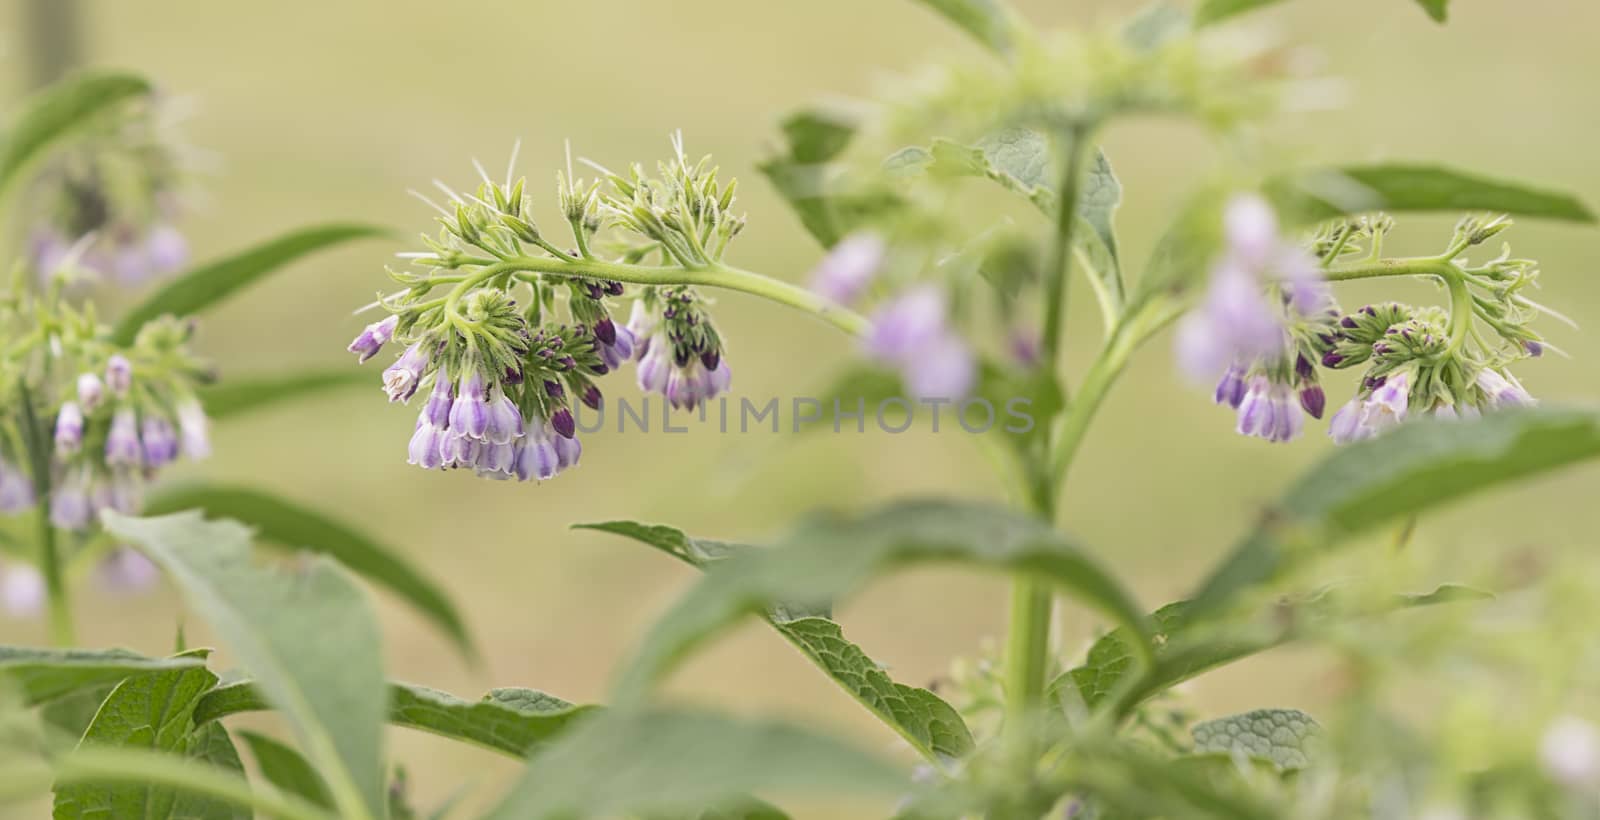 Comfrey flowers in panoramic view by sherj